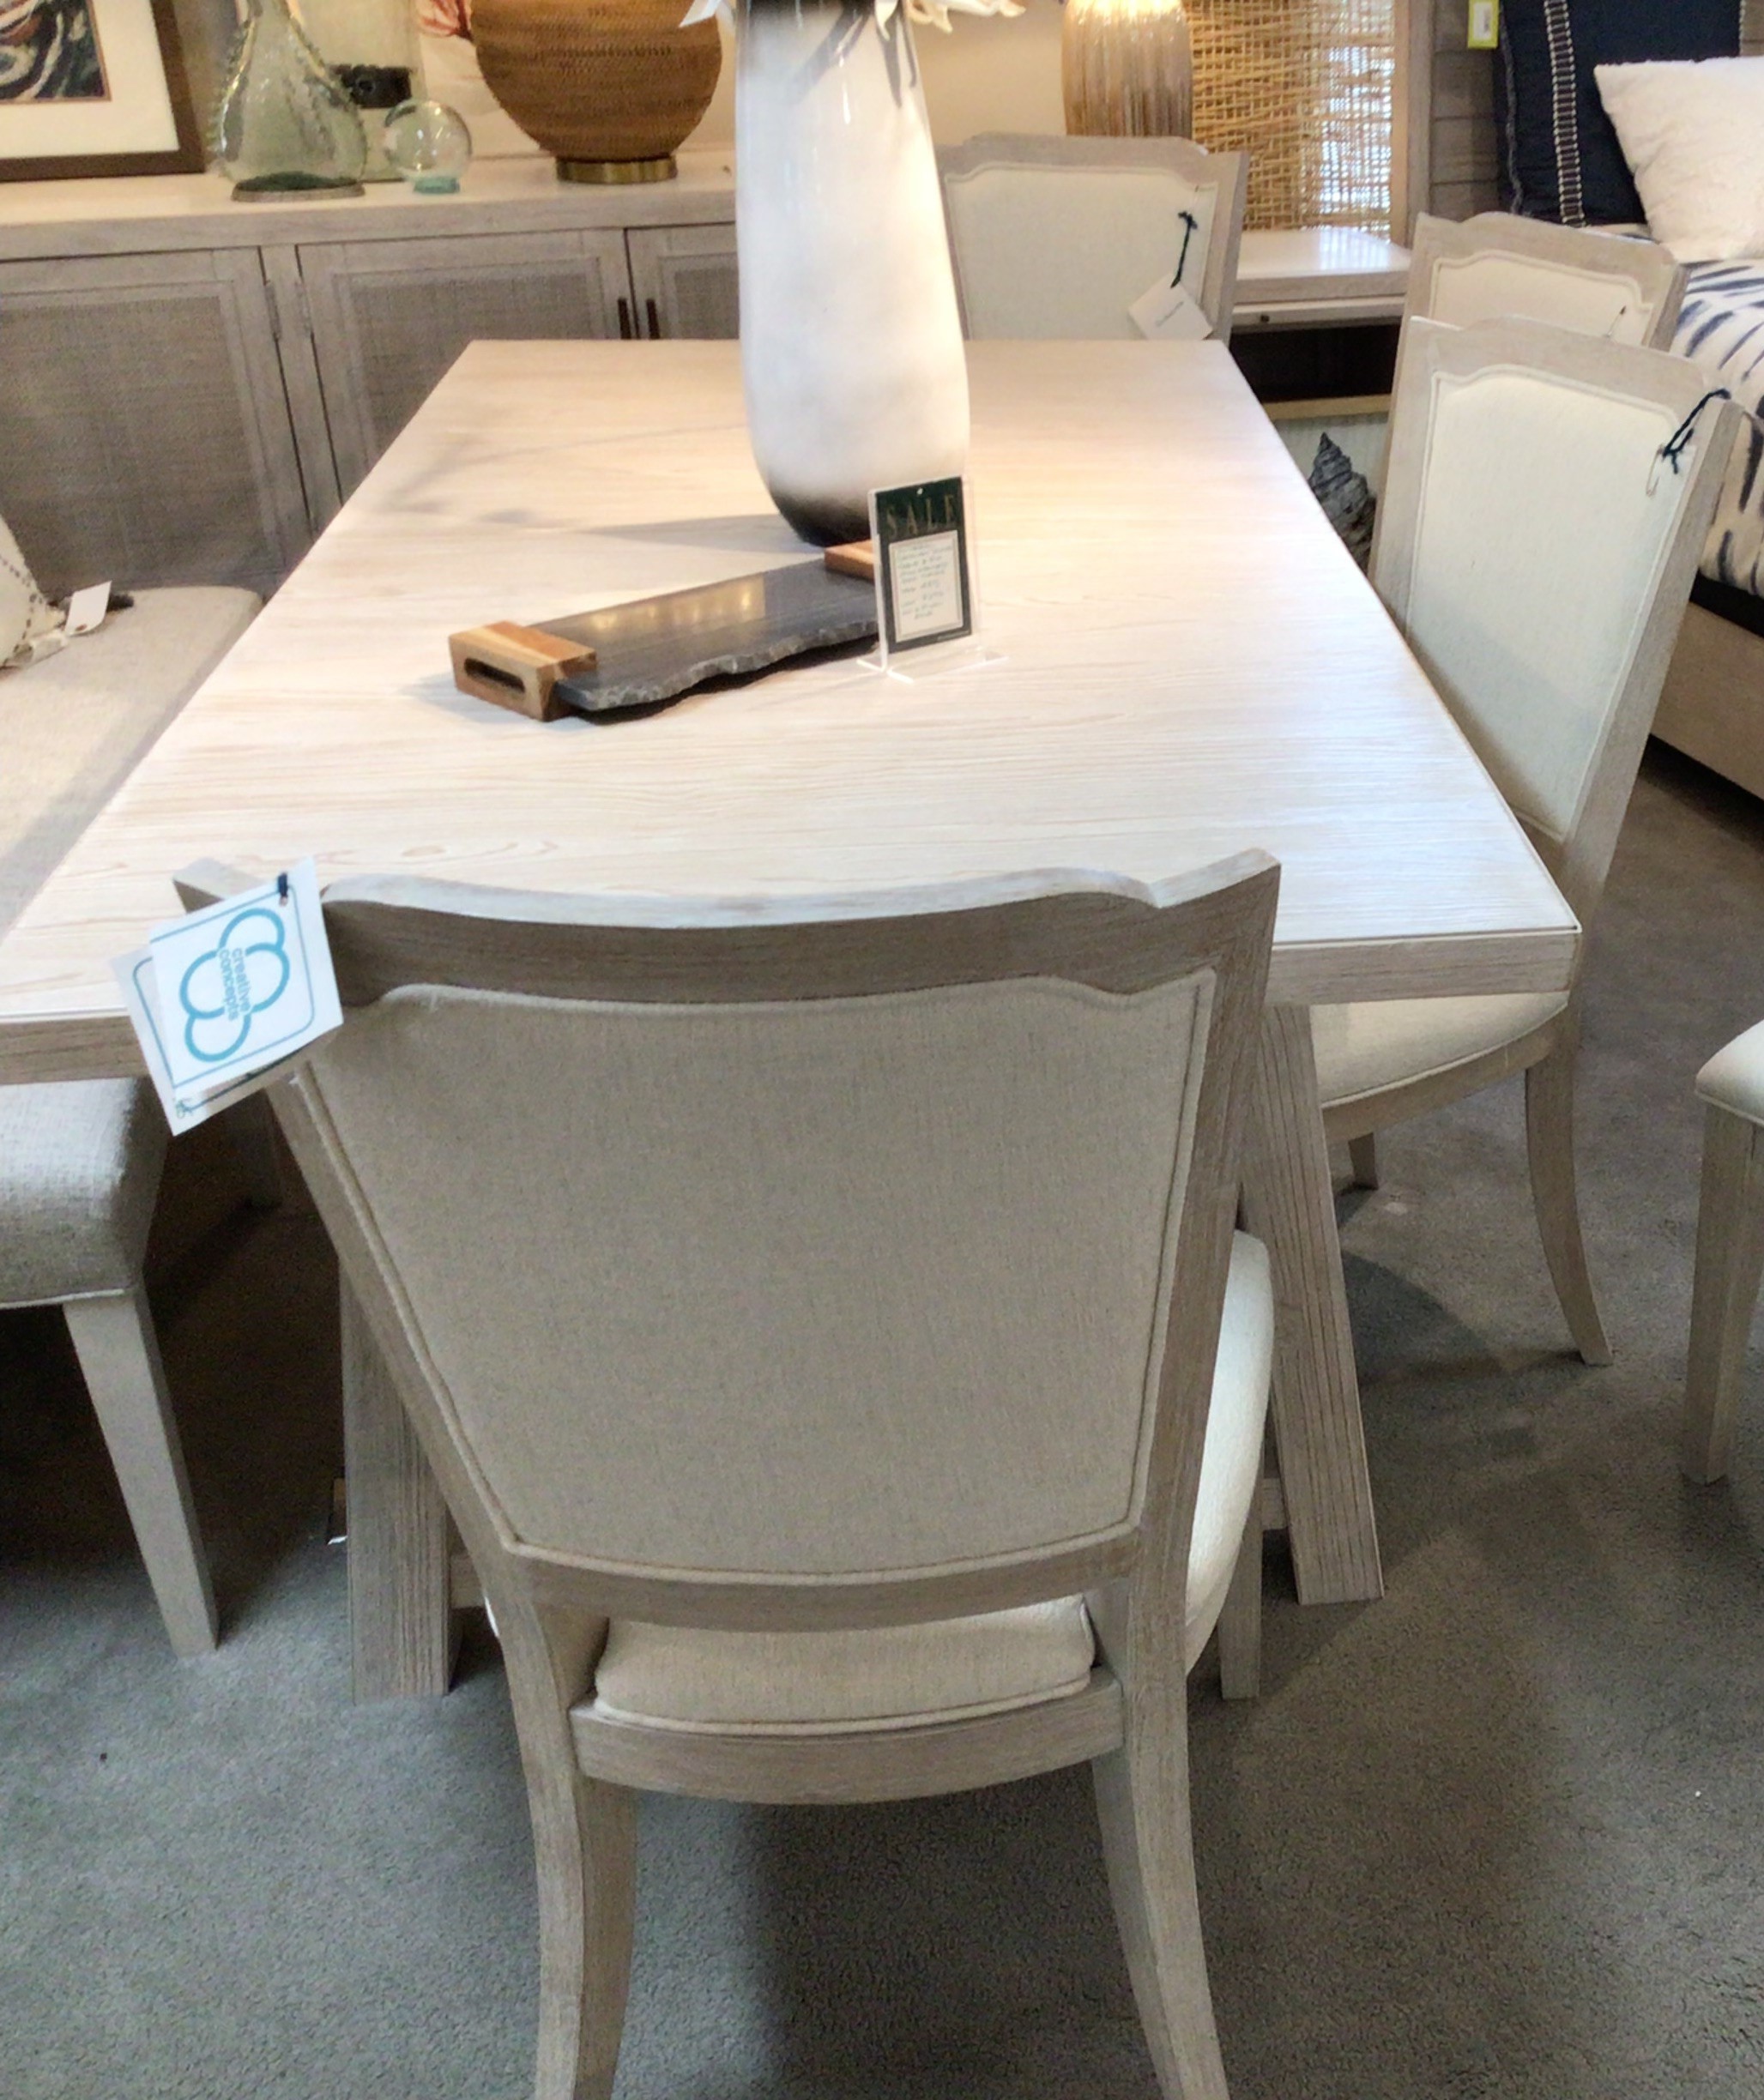 a table with chairs and a vase on it